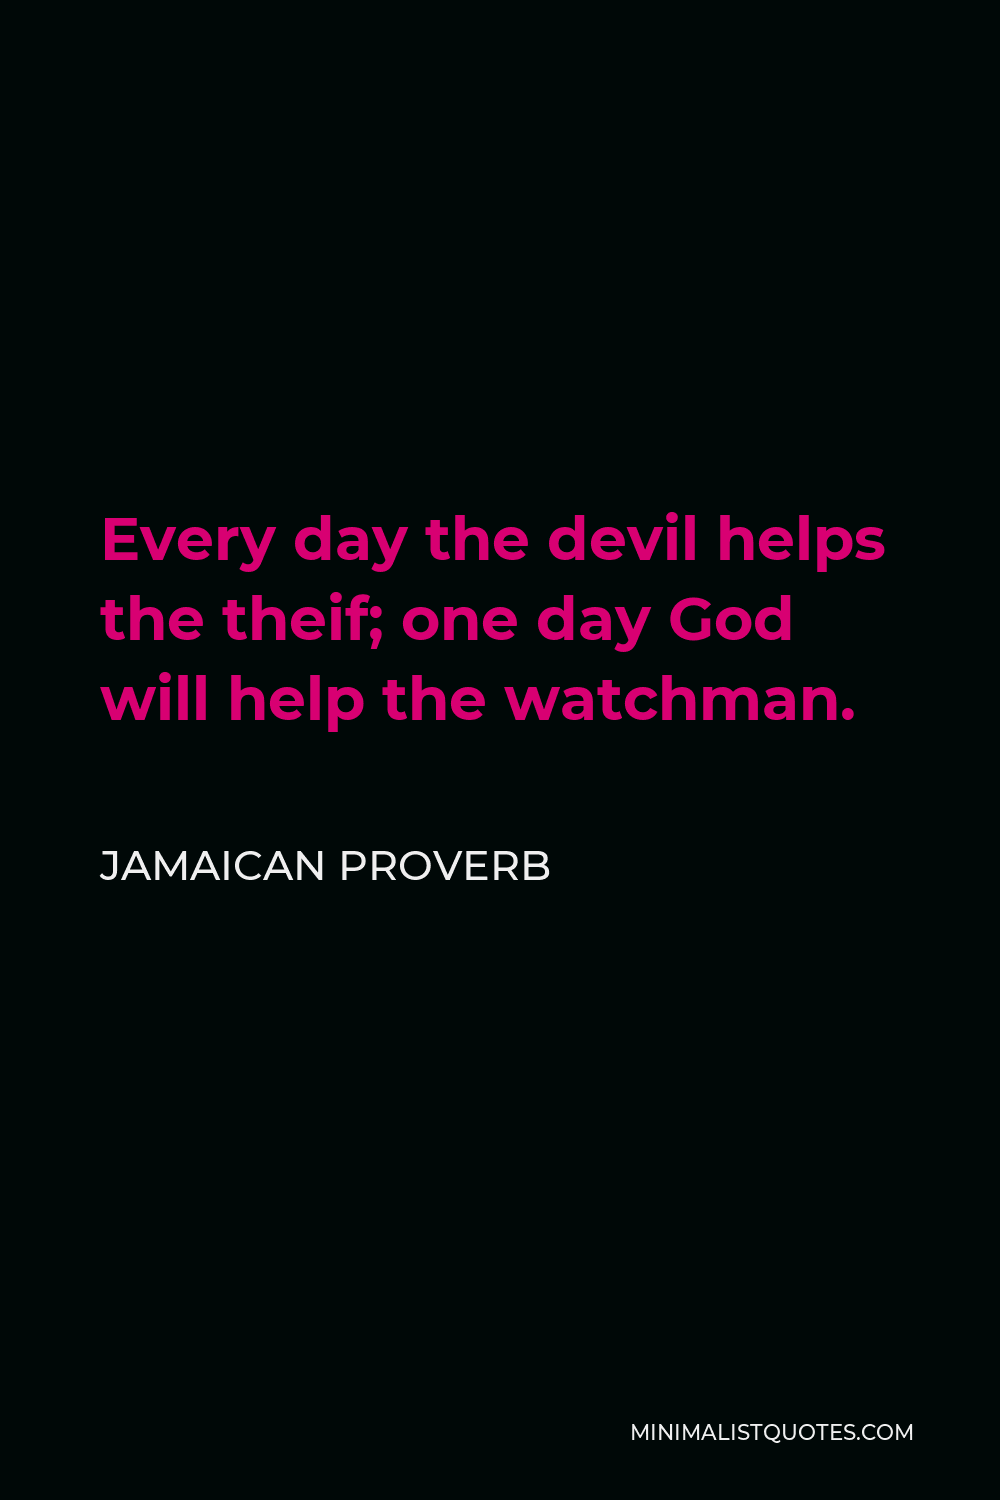 Jamaican Proverb Quote - Every day the devil helps the theif; one day God will help the watchman.